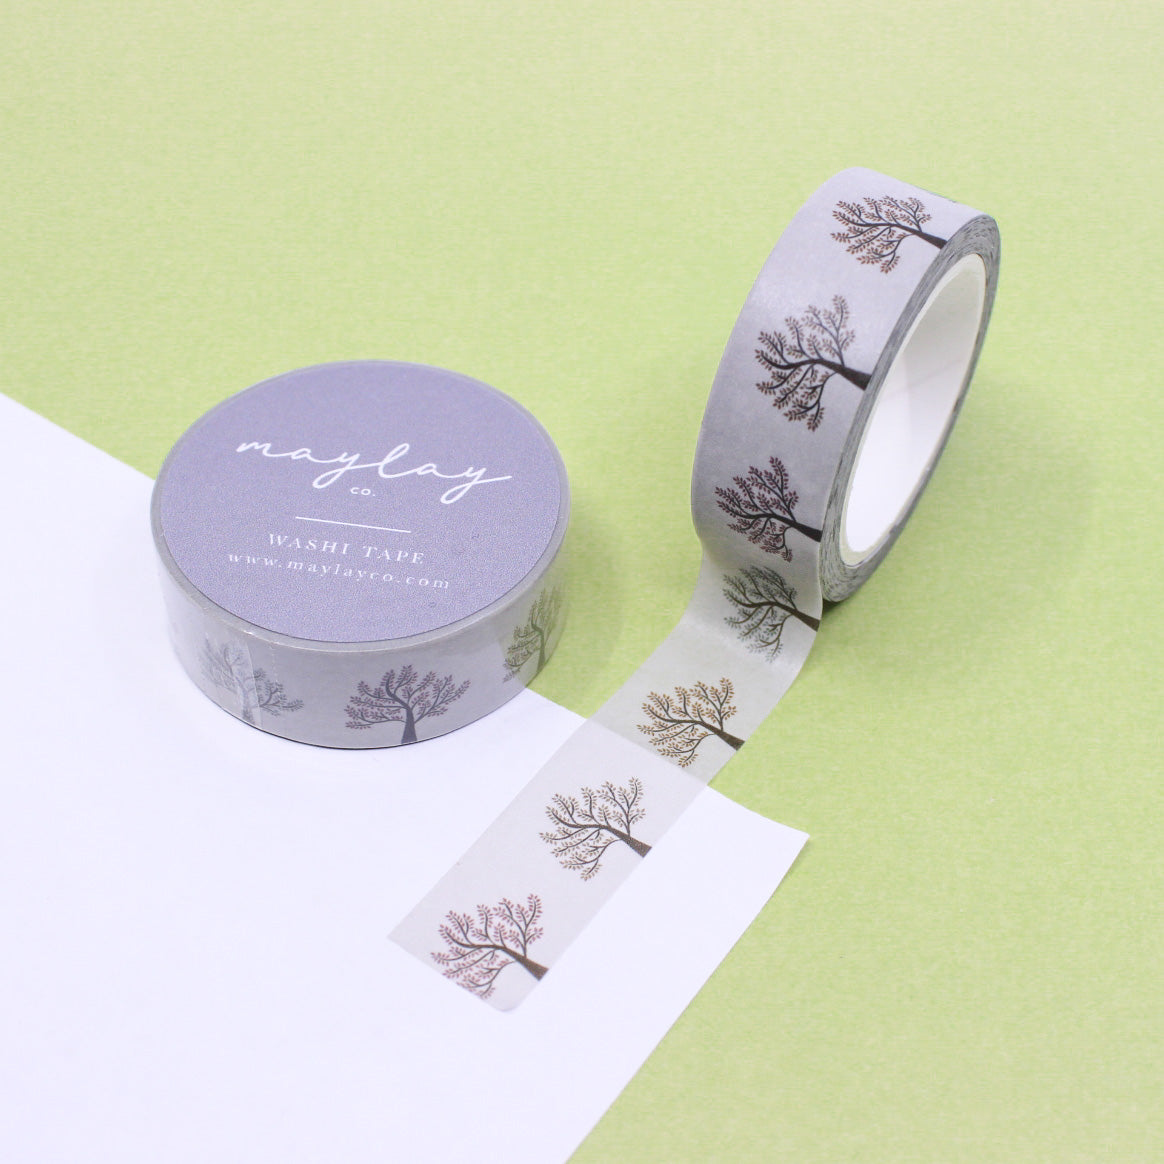 Take a serene walk in the park with our Autumn Tree Washi Tape, featuring a picturesque pattern of autumnal trees. Ideal for adding a touch of seasonal beauty to your projects. This tape is from Maylay Co and sold at BBB Supplies Craft Shop.